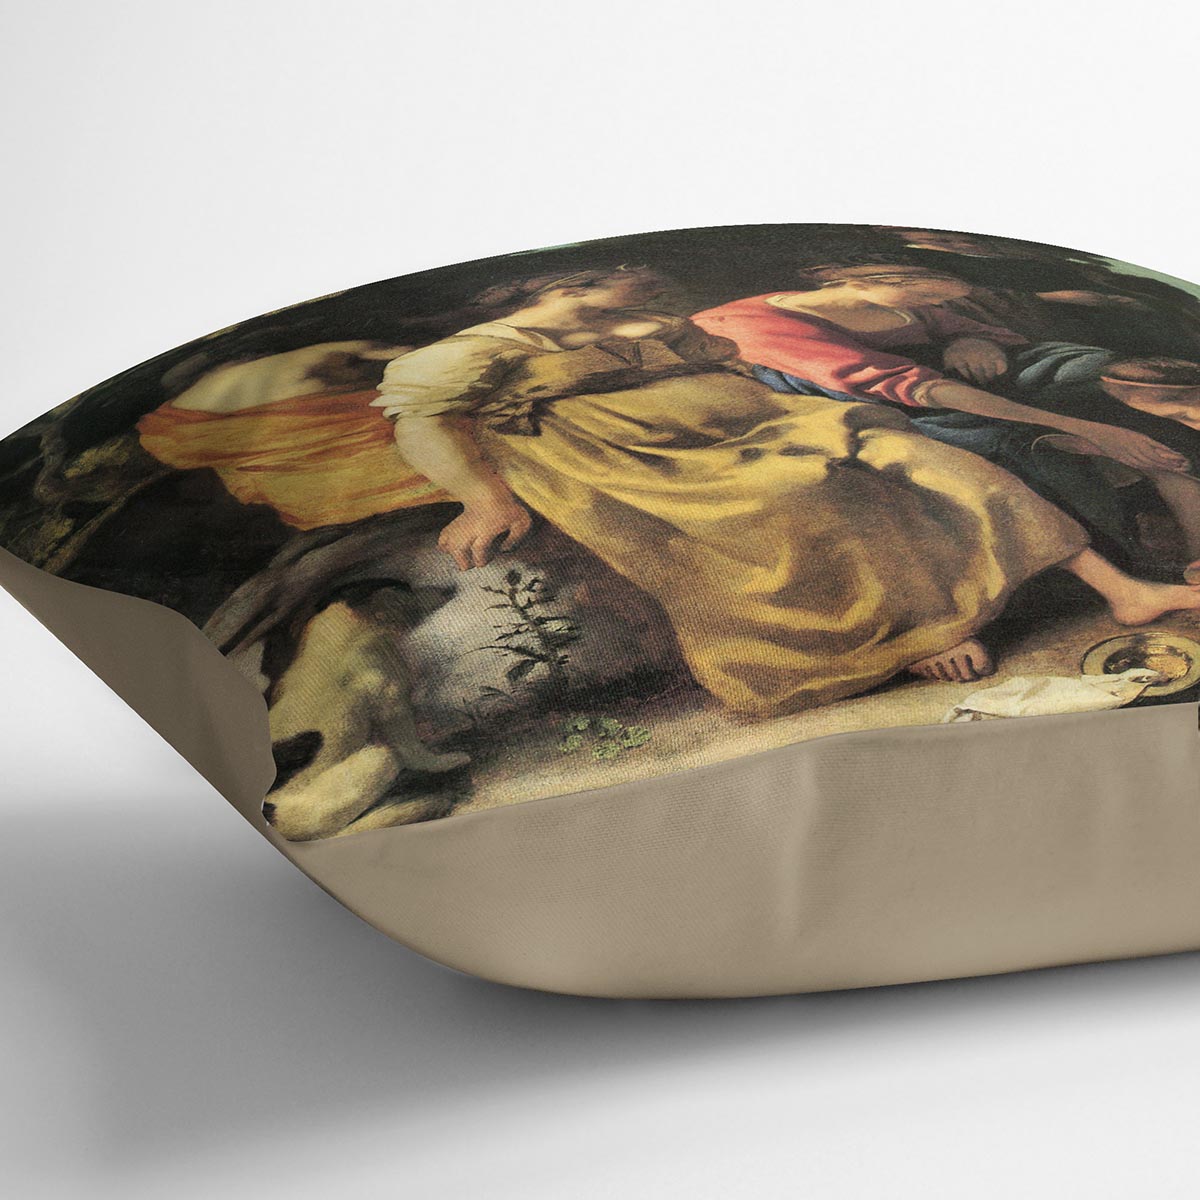 Diana and her nymphs by Vermeer Cushion